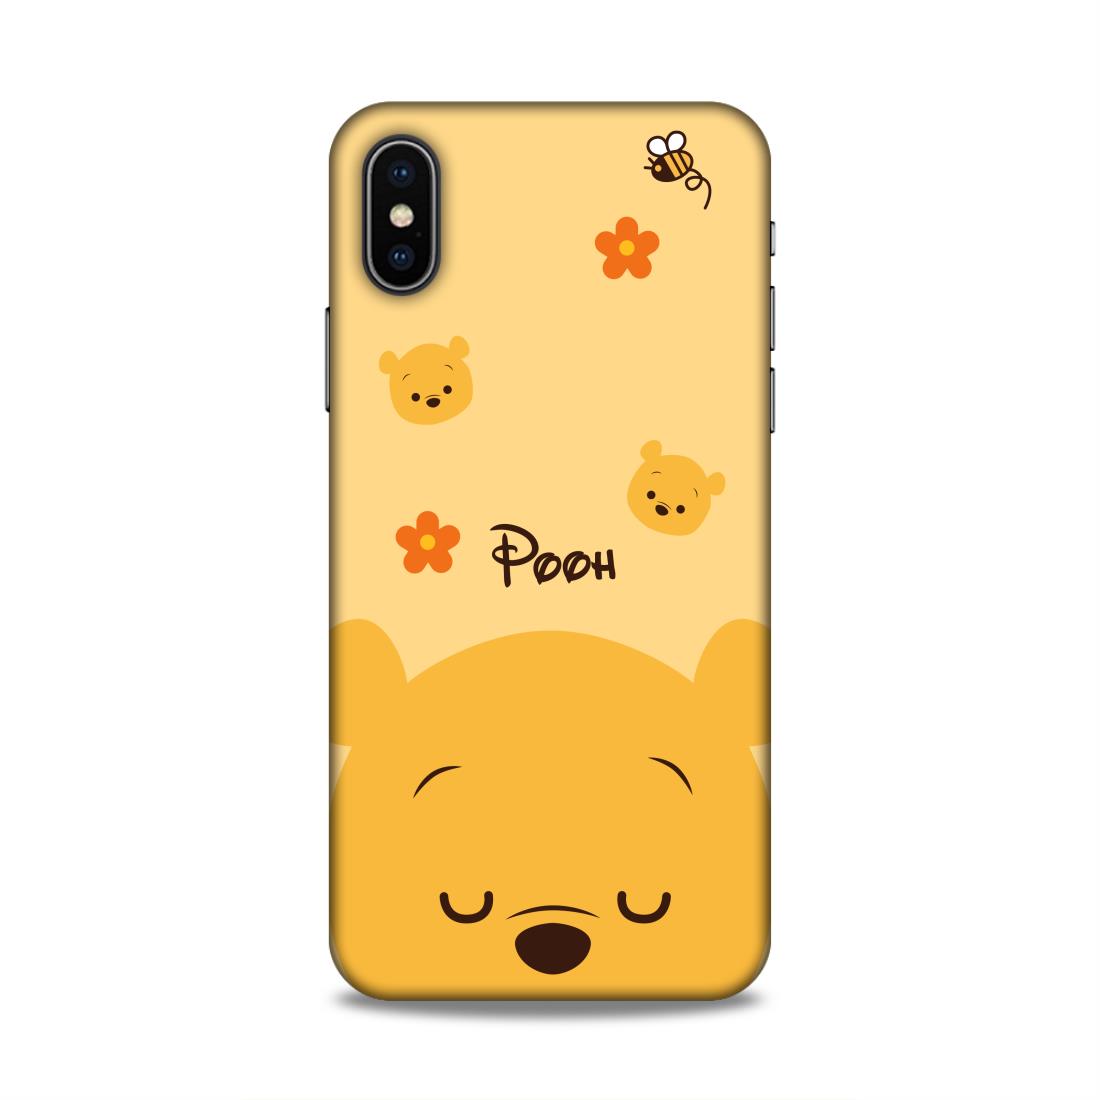 Pooh Cartton Hard Back Case For Apple iPhone X/XS